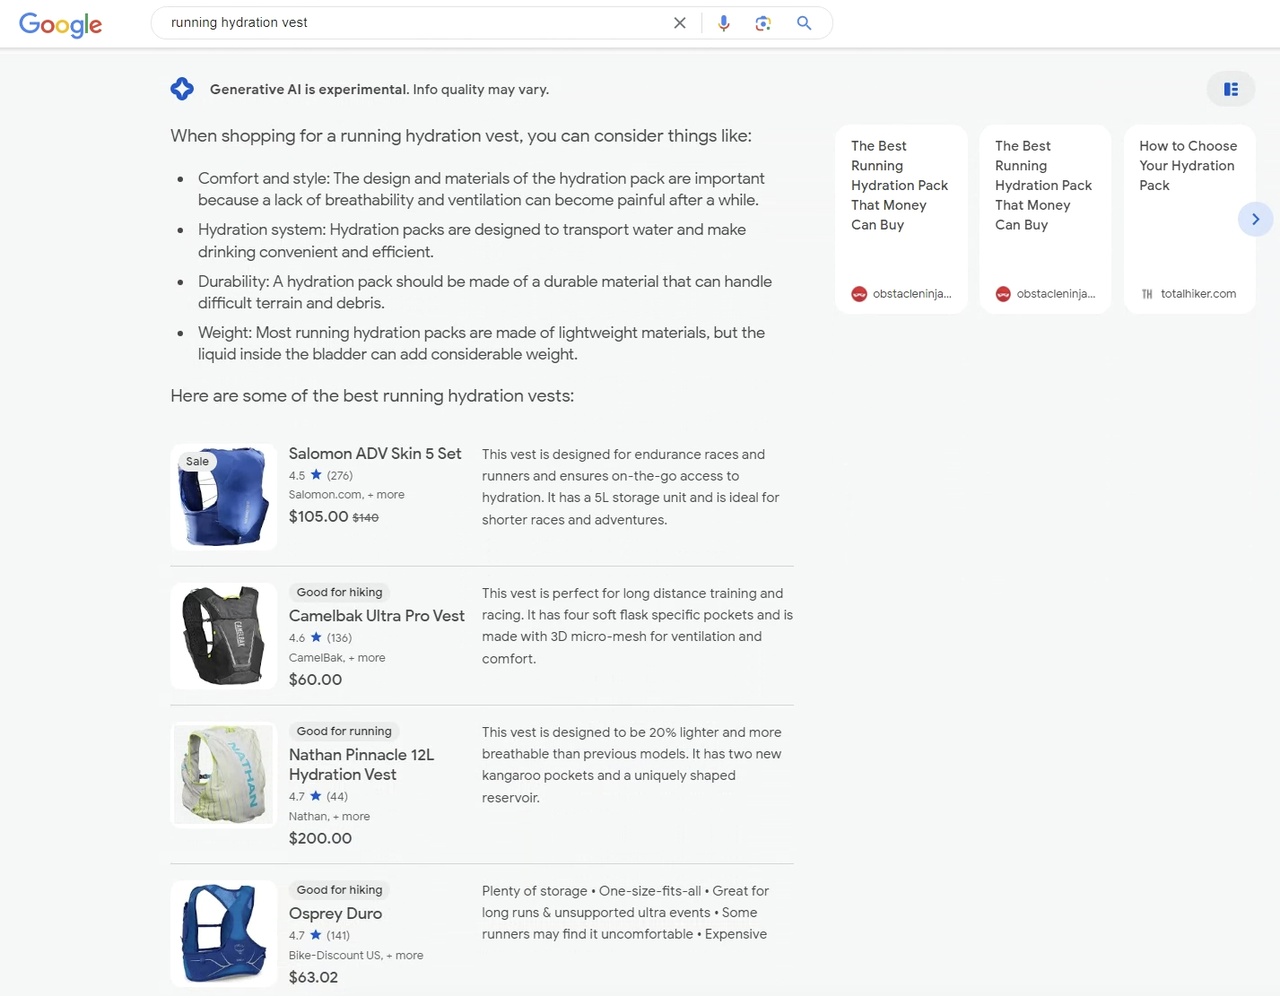 Google Shopping results for running hydration vests. Google's Generative AI has provided further information about things to consider when purchasing a hydration vest.